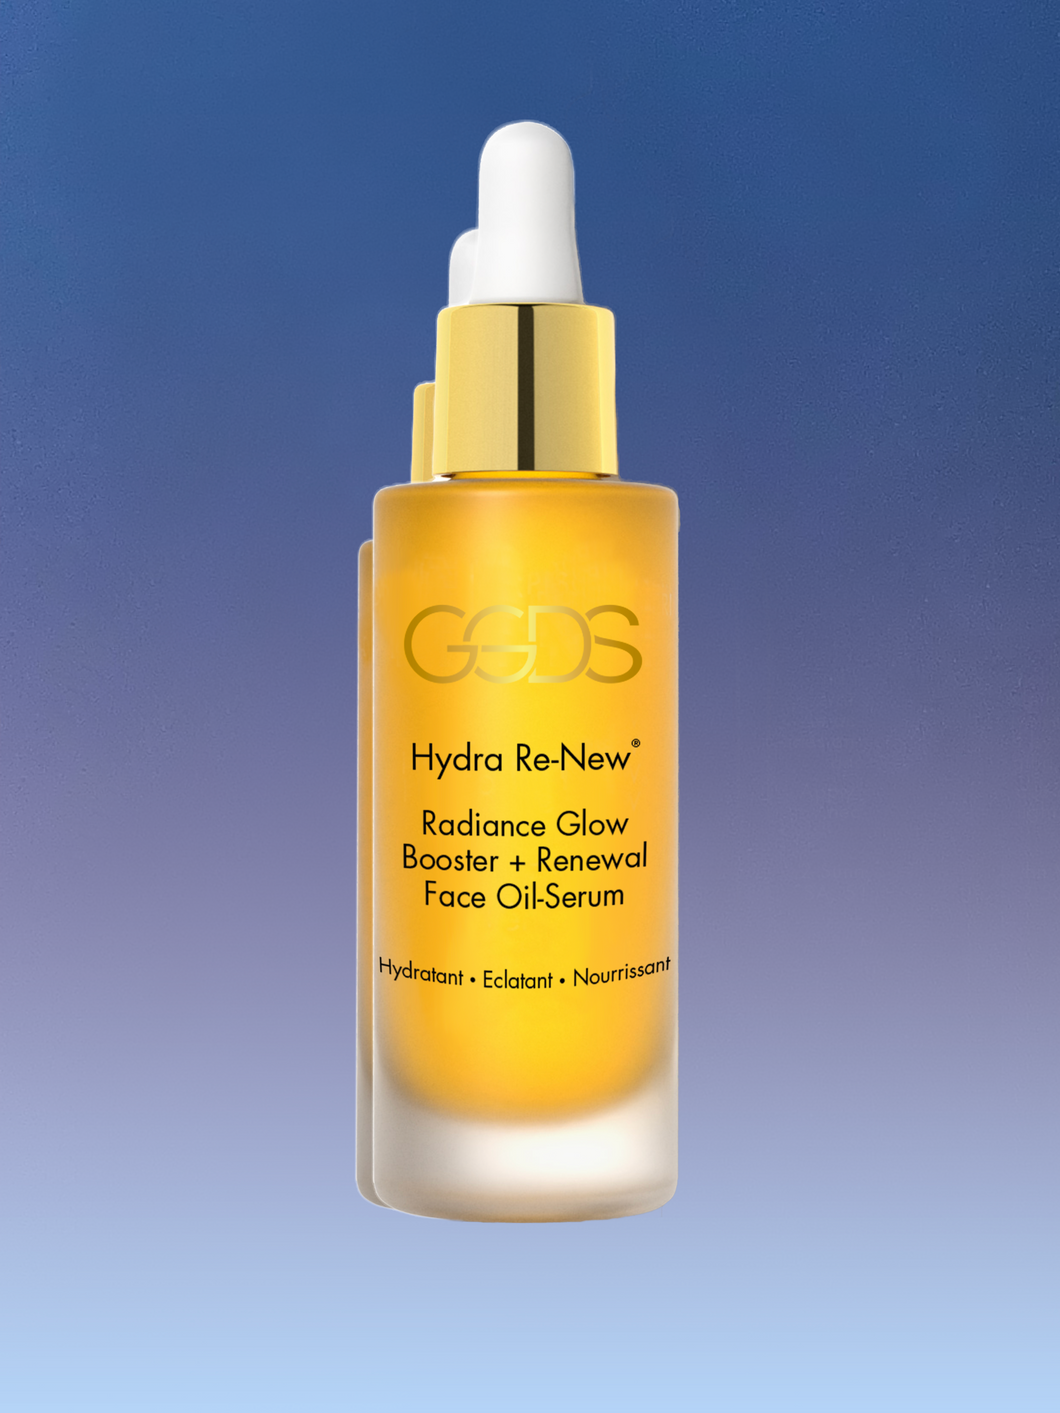 Hydra Re-New® Radiance Glow Booster+ Renewal Face Oil-Serum